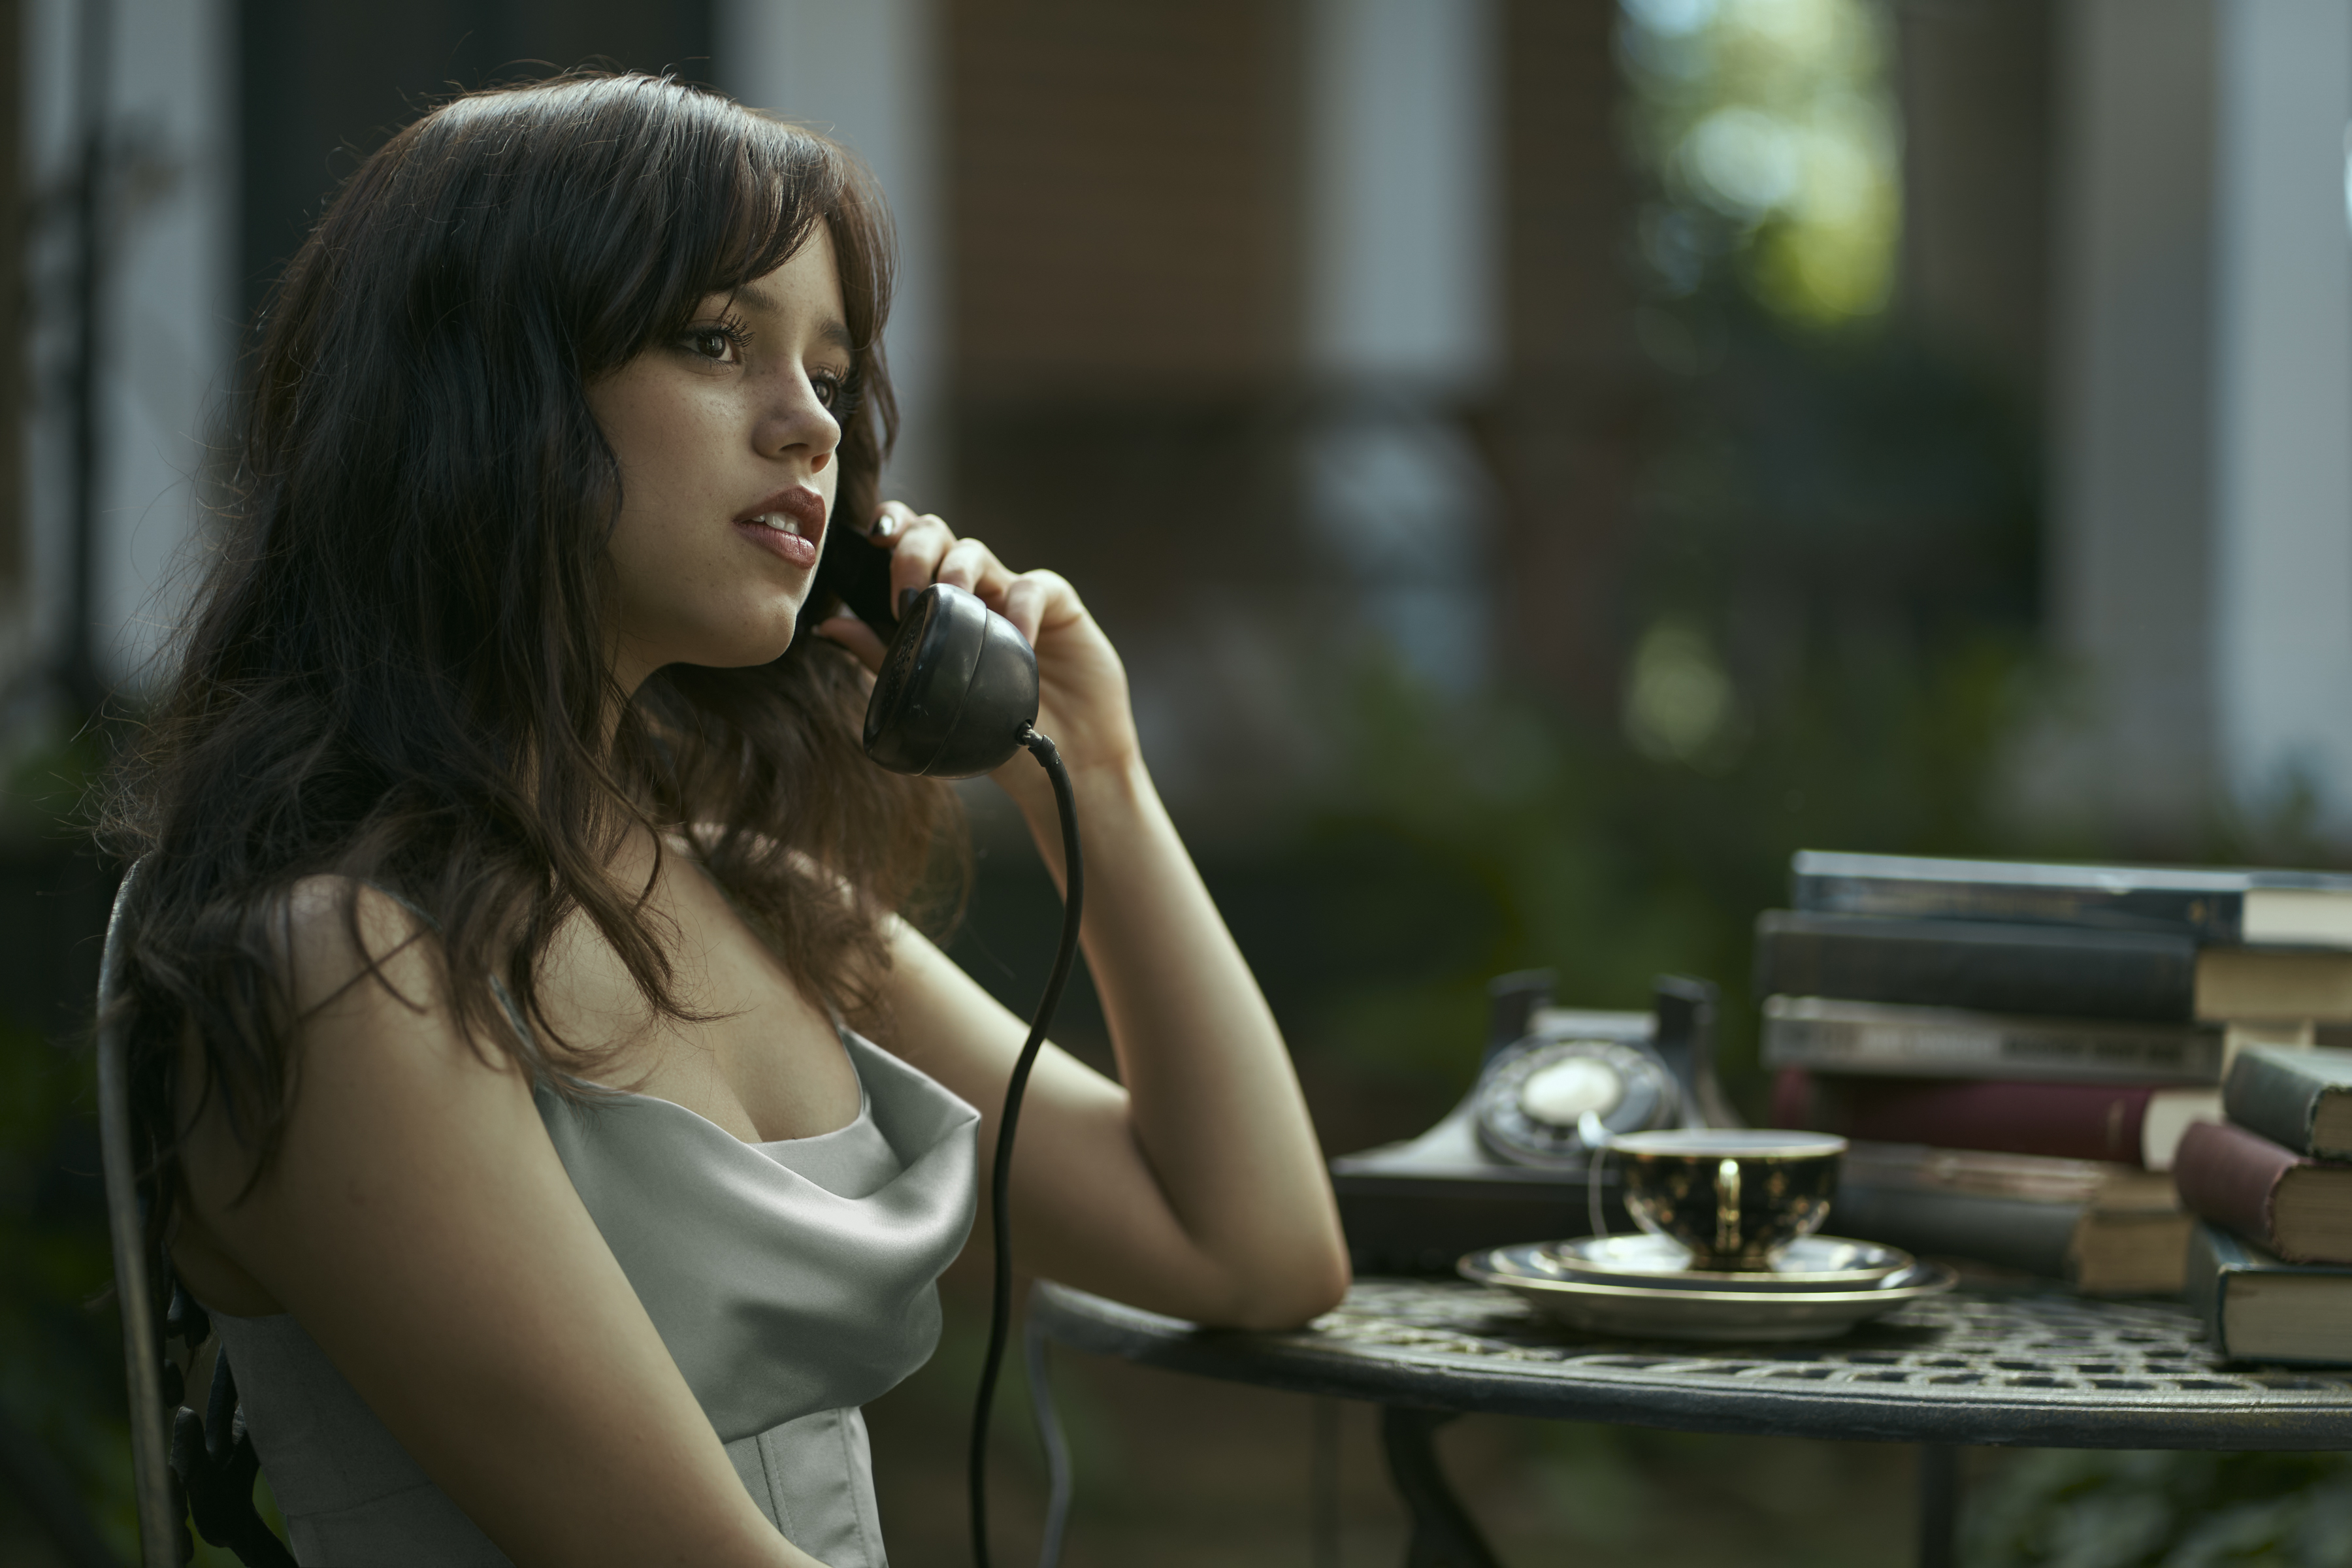 Cairo Sweet (Jenna Ortega, in a silver silk dress baring her arms and cleavage) sits at a table covered with books talking on an old-fashioned dial telephone in Miller’s Girl